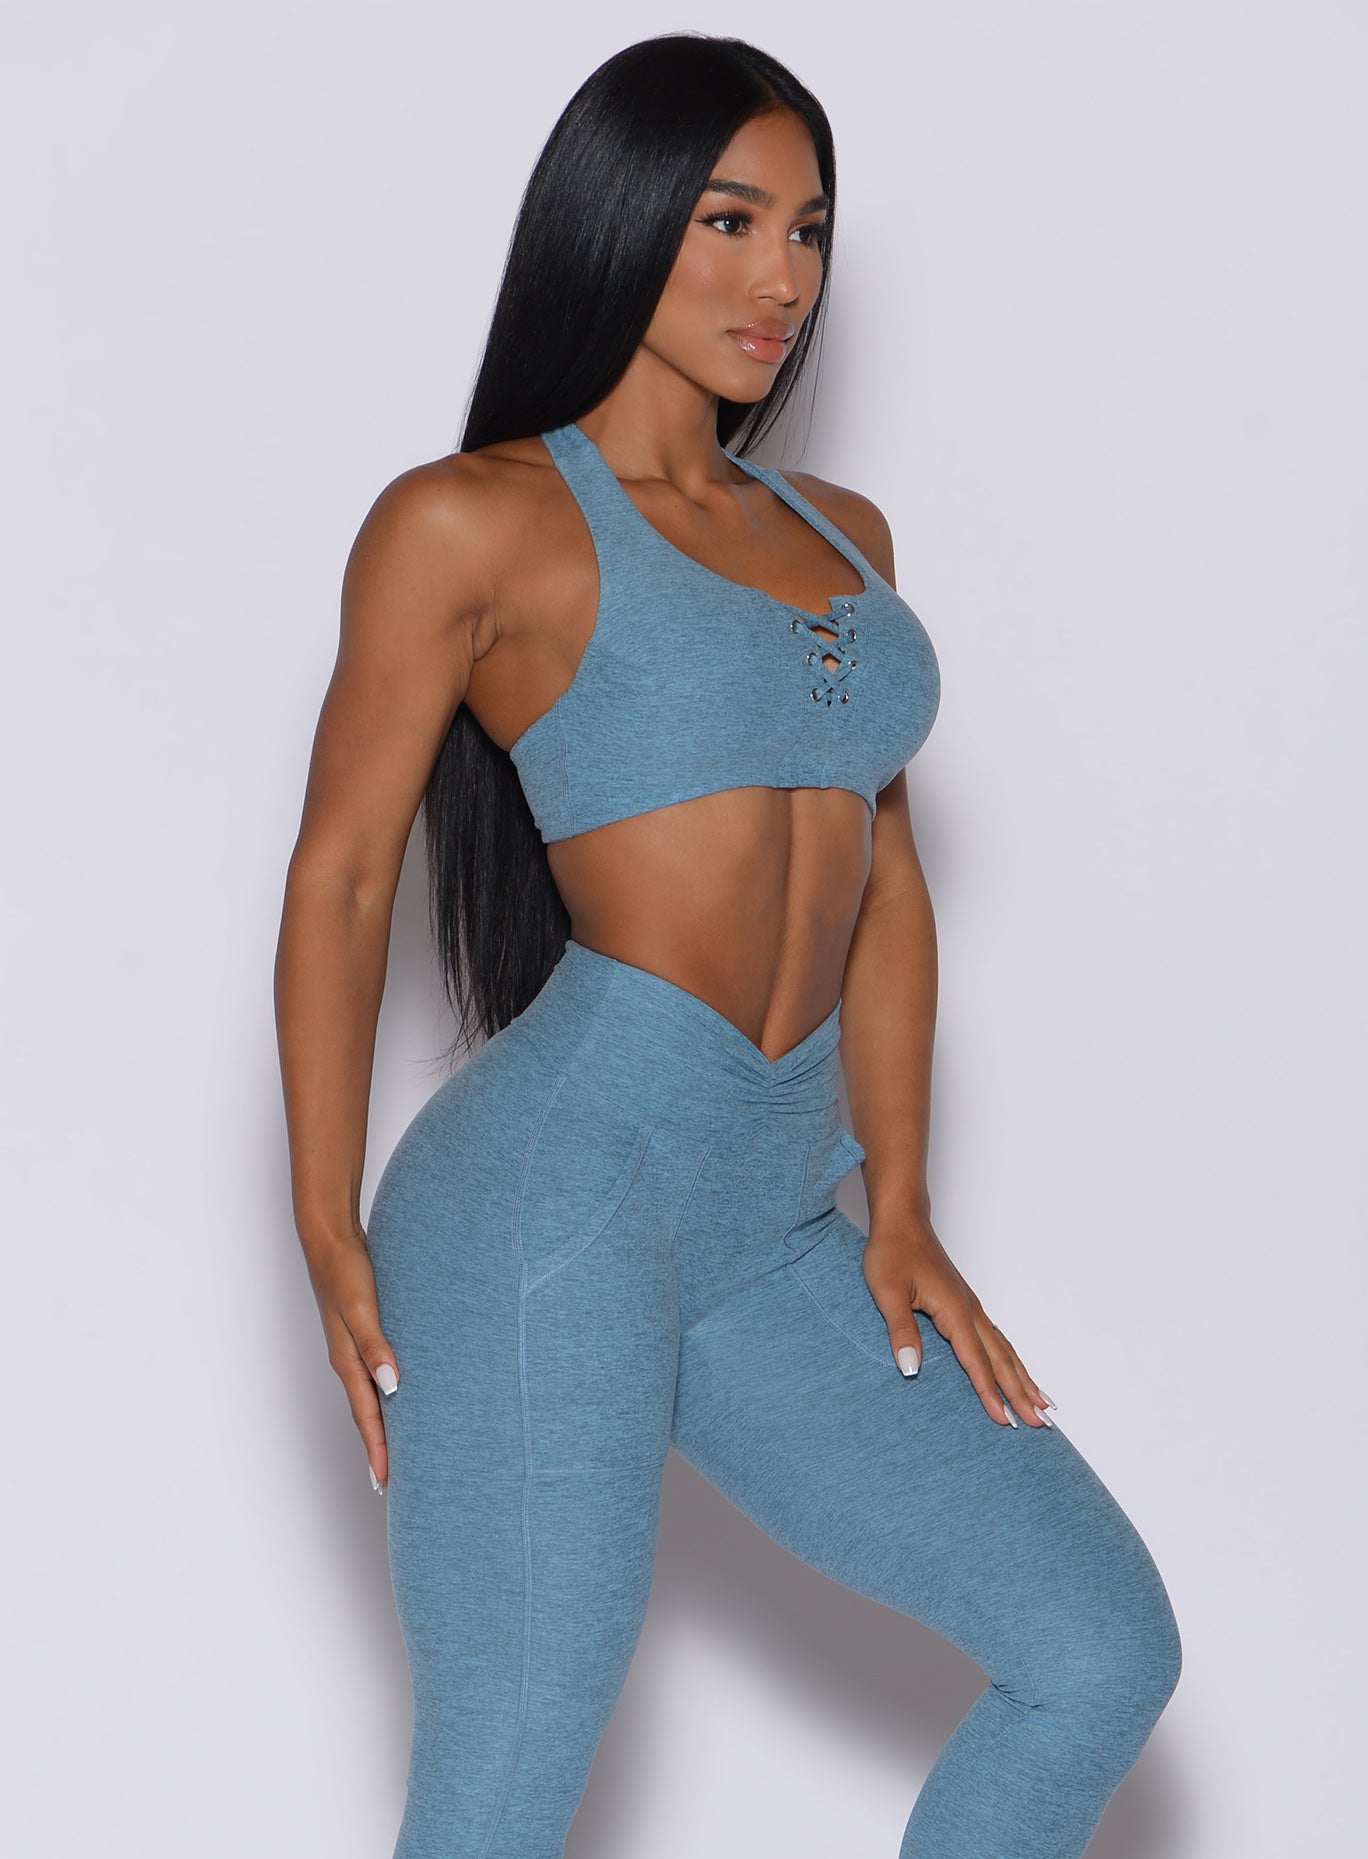 Right side profile picture of a model in our laced crop bra in baby blue color and a matching leggings